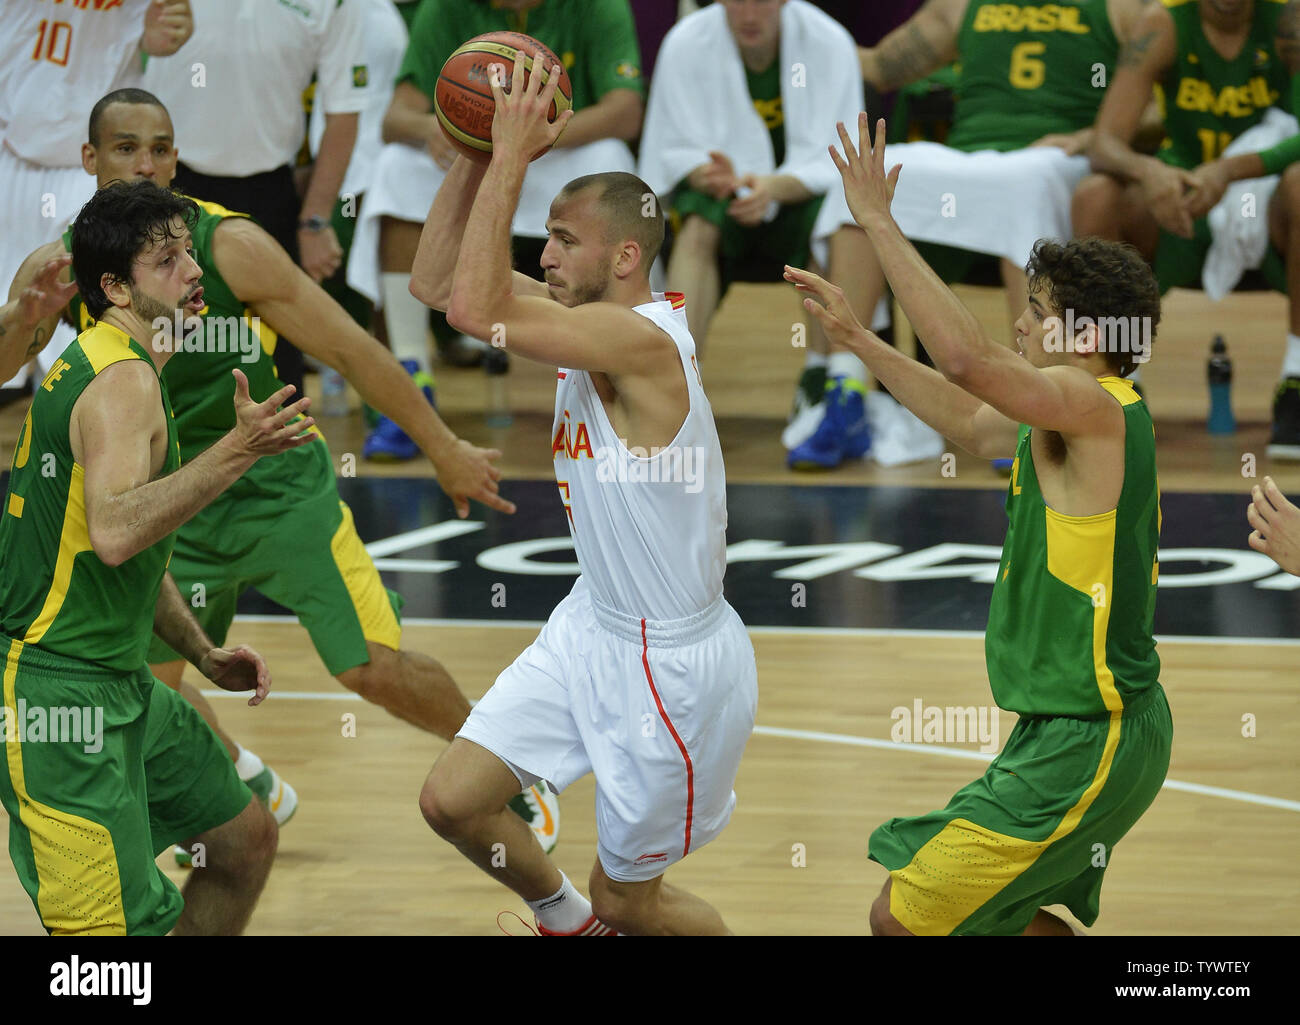 Spain's Sergio Rodriguez (C) drives to the basket as he is defended against by Brazil's Guilherme Giovannoni (L) and Raul Neto, during the Brazil-Spain Men's Basketball Preliminary competition at the 2012 Summer Olympics, August 6, 2012, in London, England.             UPI/Mike Theiler Stock Photo